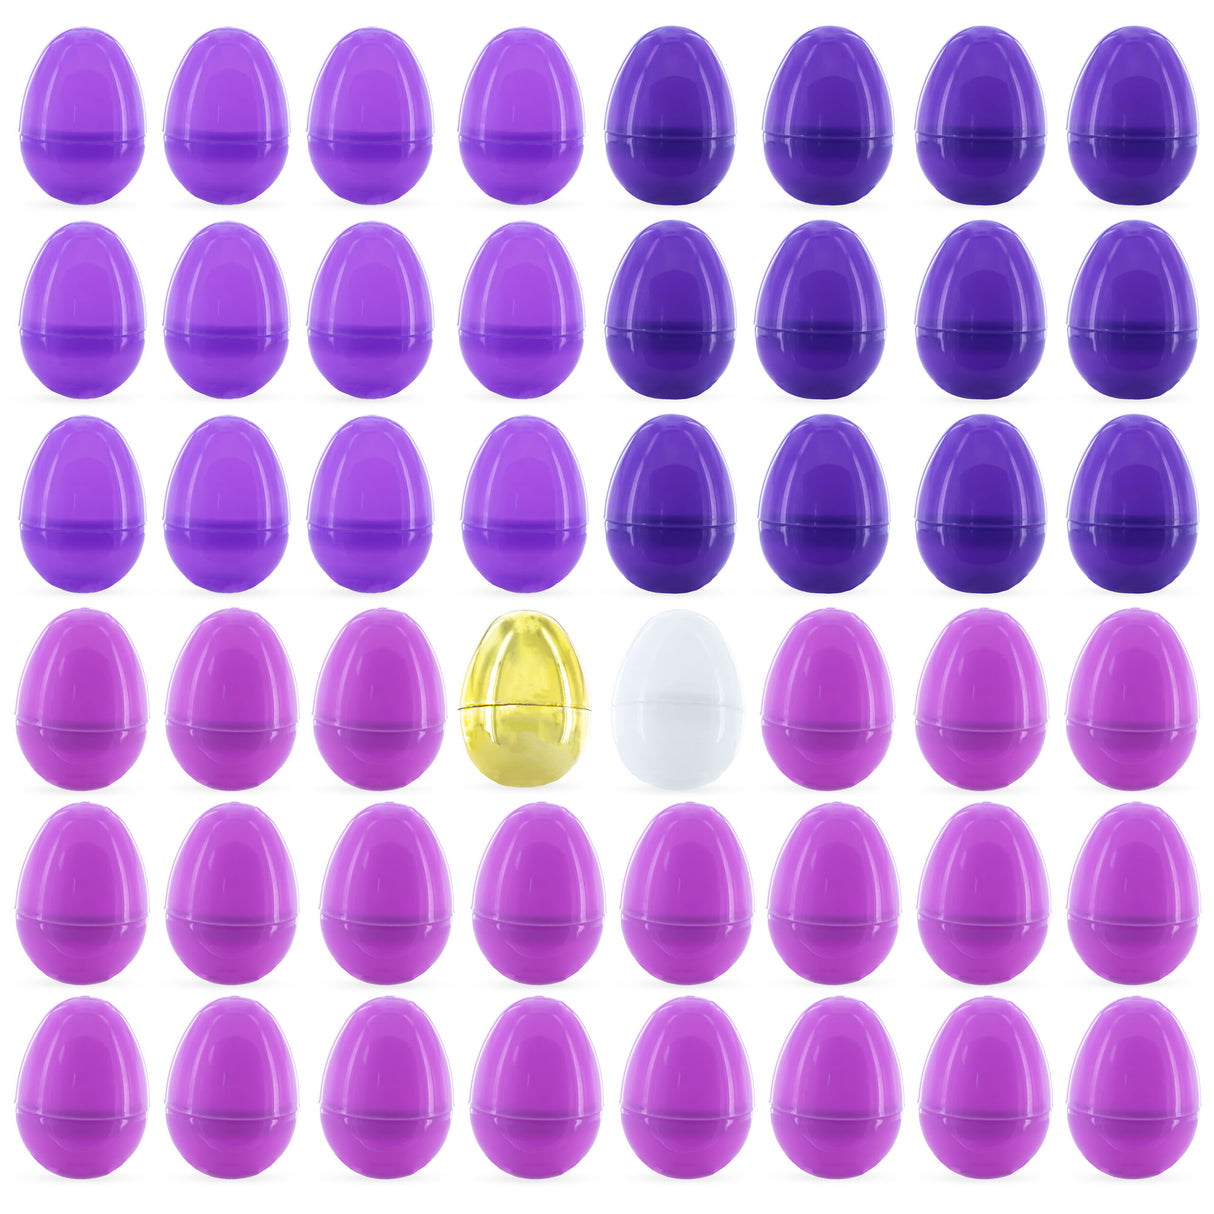 Set of 46 Purple Plastic Eggs, 1 White Egg, and 1 Gleaming Golden Easter Egg in Purple color, Oval shape